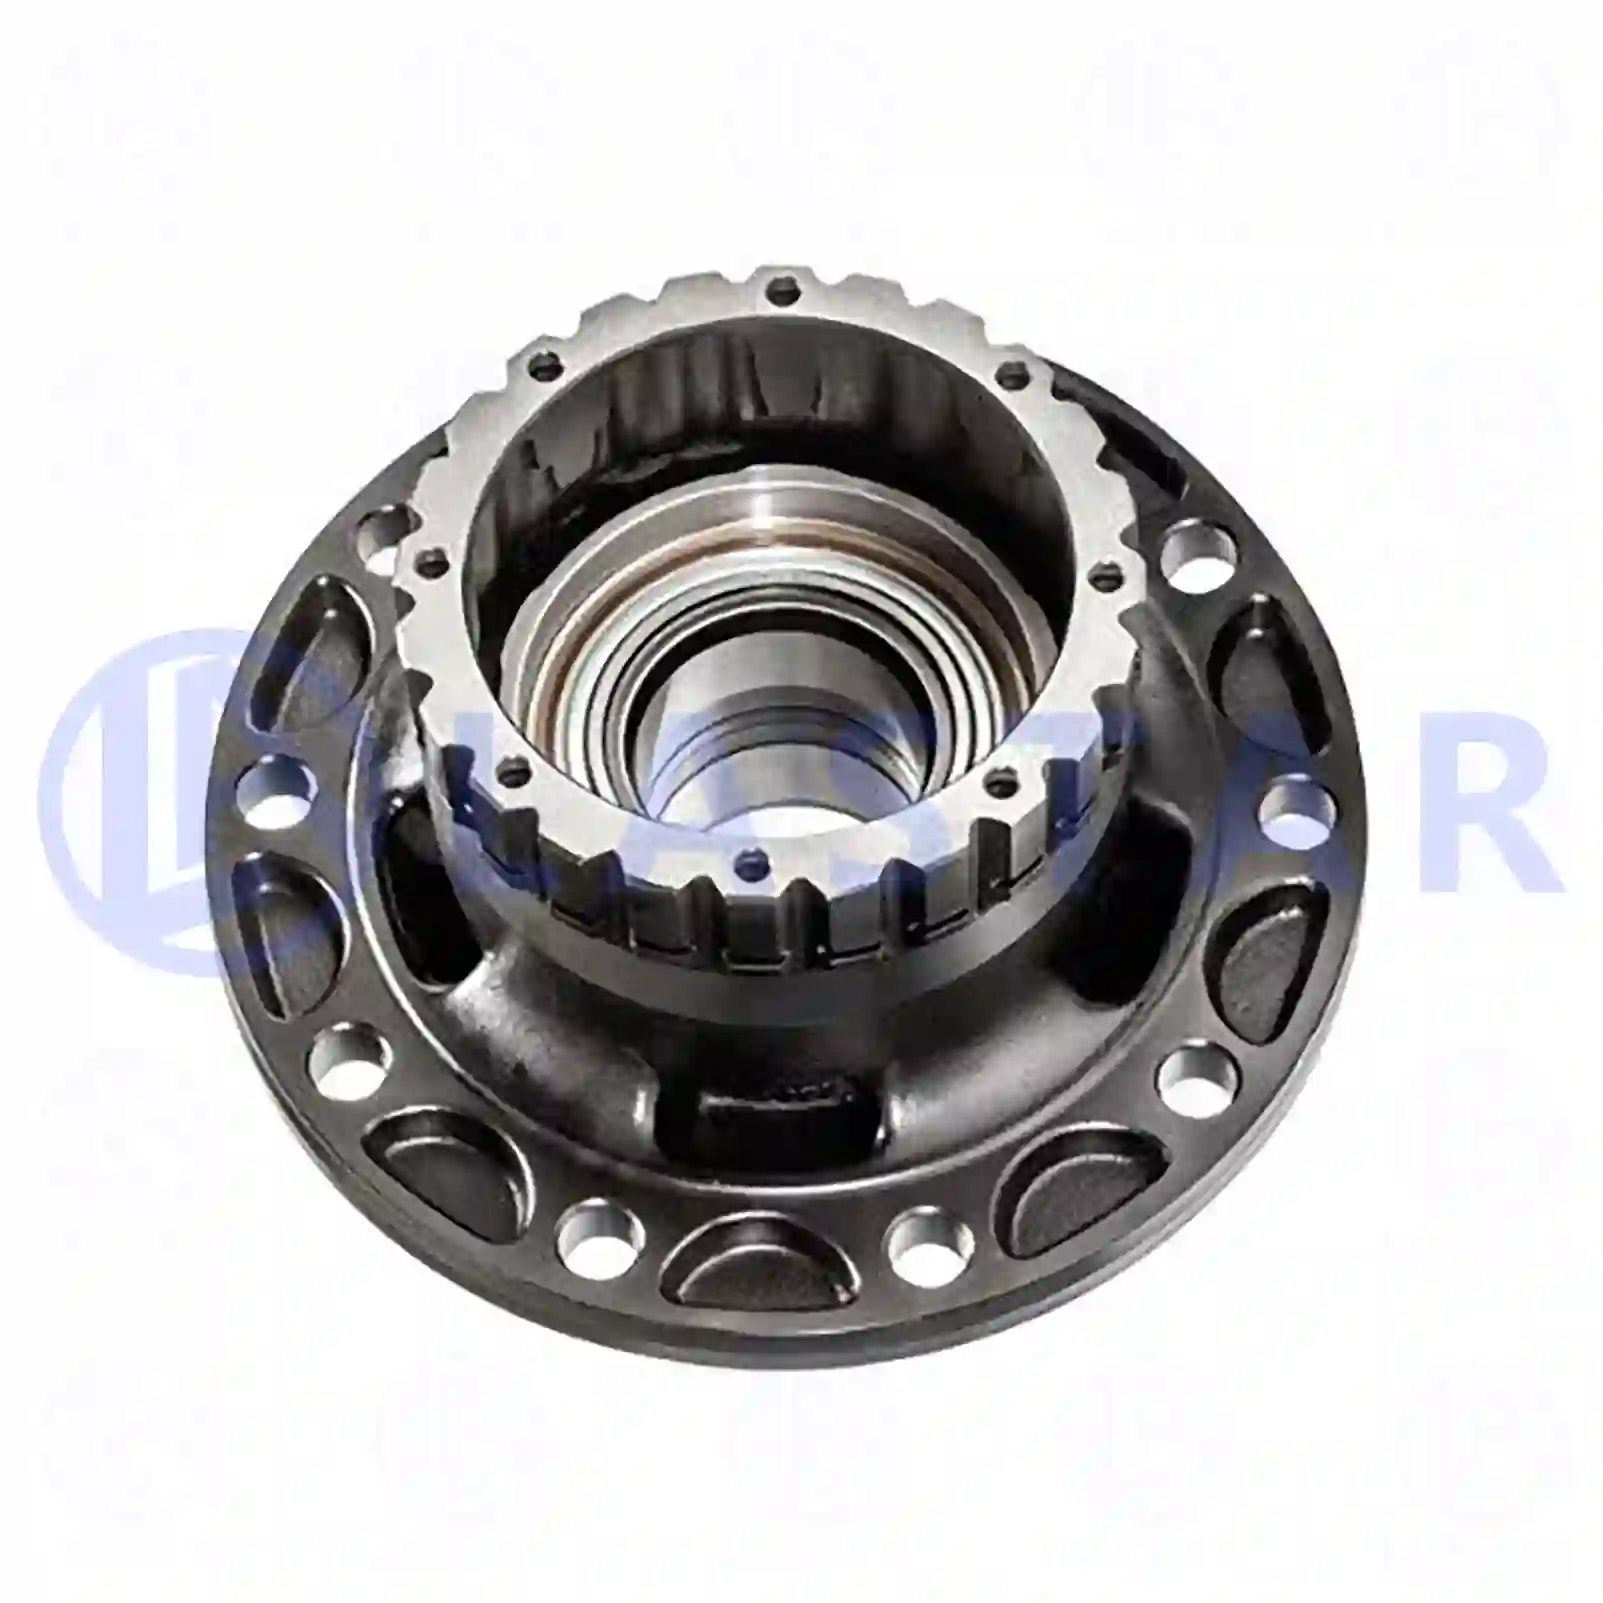 Wheel hub, without bearings, without ABS ring, 77726595, 7420535263, 7420535264S, 7485107753, 20516957, 20535263, 20567394S2, 85107753, , ||  77726595 Lastar Spare Part | Truck Spare Parts, Auotomotive Spare Parts Wheel hub, without bearings, without ABS ring, 77726595, 7420535263, 7420535264S, 7485107753, 20516957, 20535263, 20567394S2, 85107753, , ||  77726595 Lastar Spare Part | Truck Spare Parts, Auotomotive Spare Parts